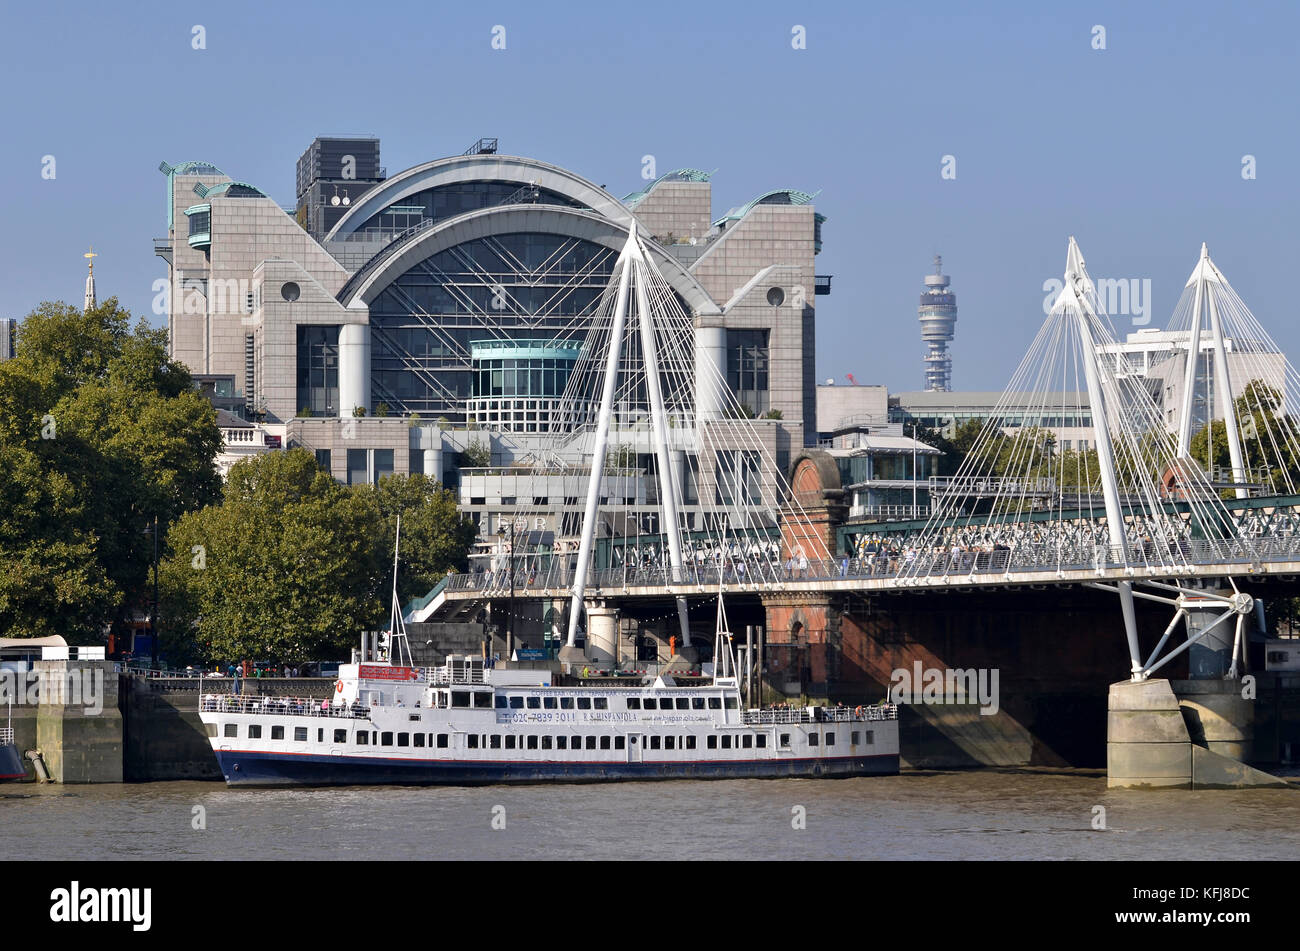 Golden Jubilee and Hungerford Bridges, River Thames, London, UK. RS Hispaniola in foreground and Charing Cross Station behind. Stock Photo